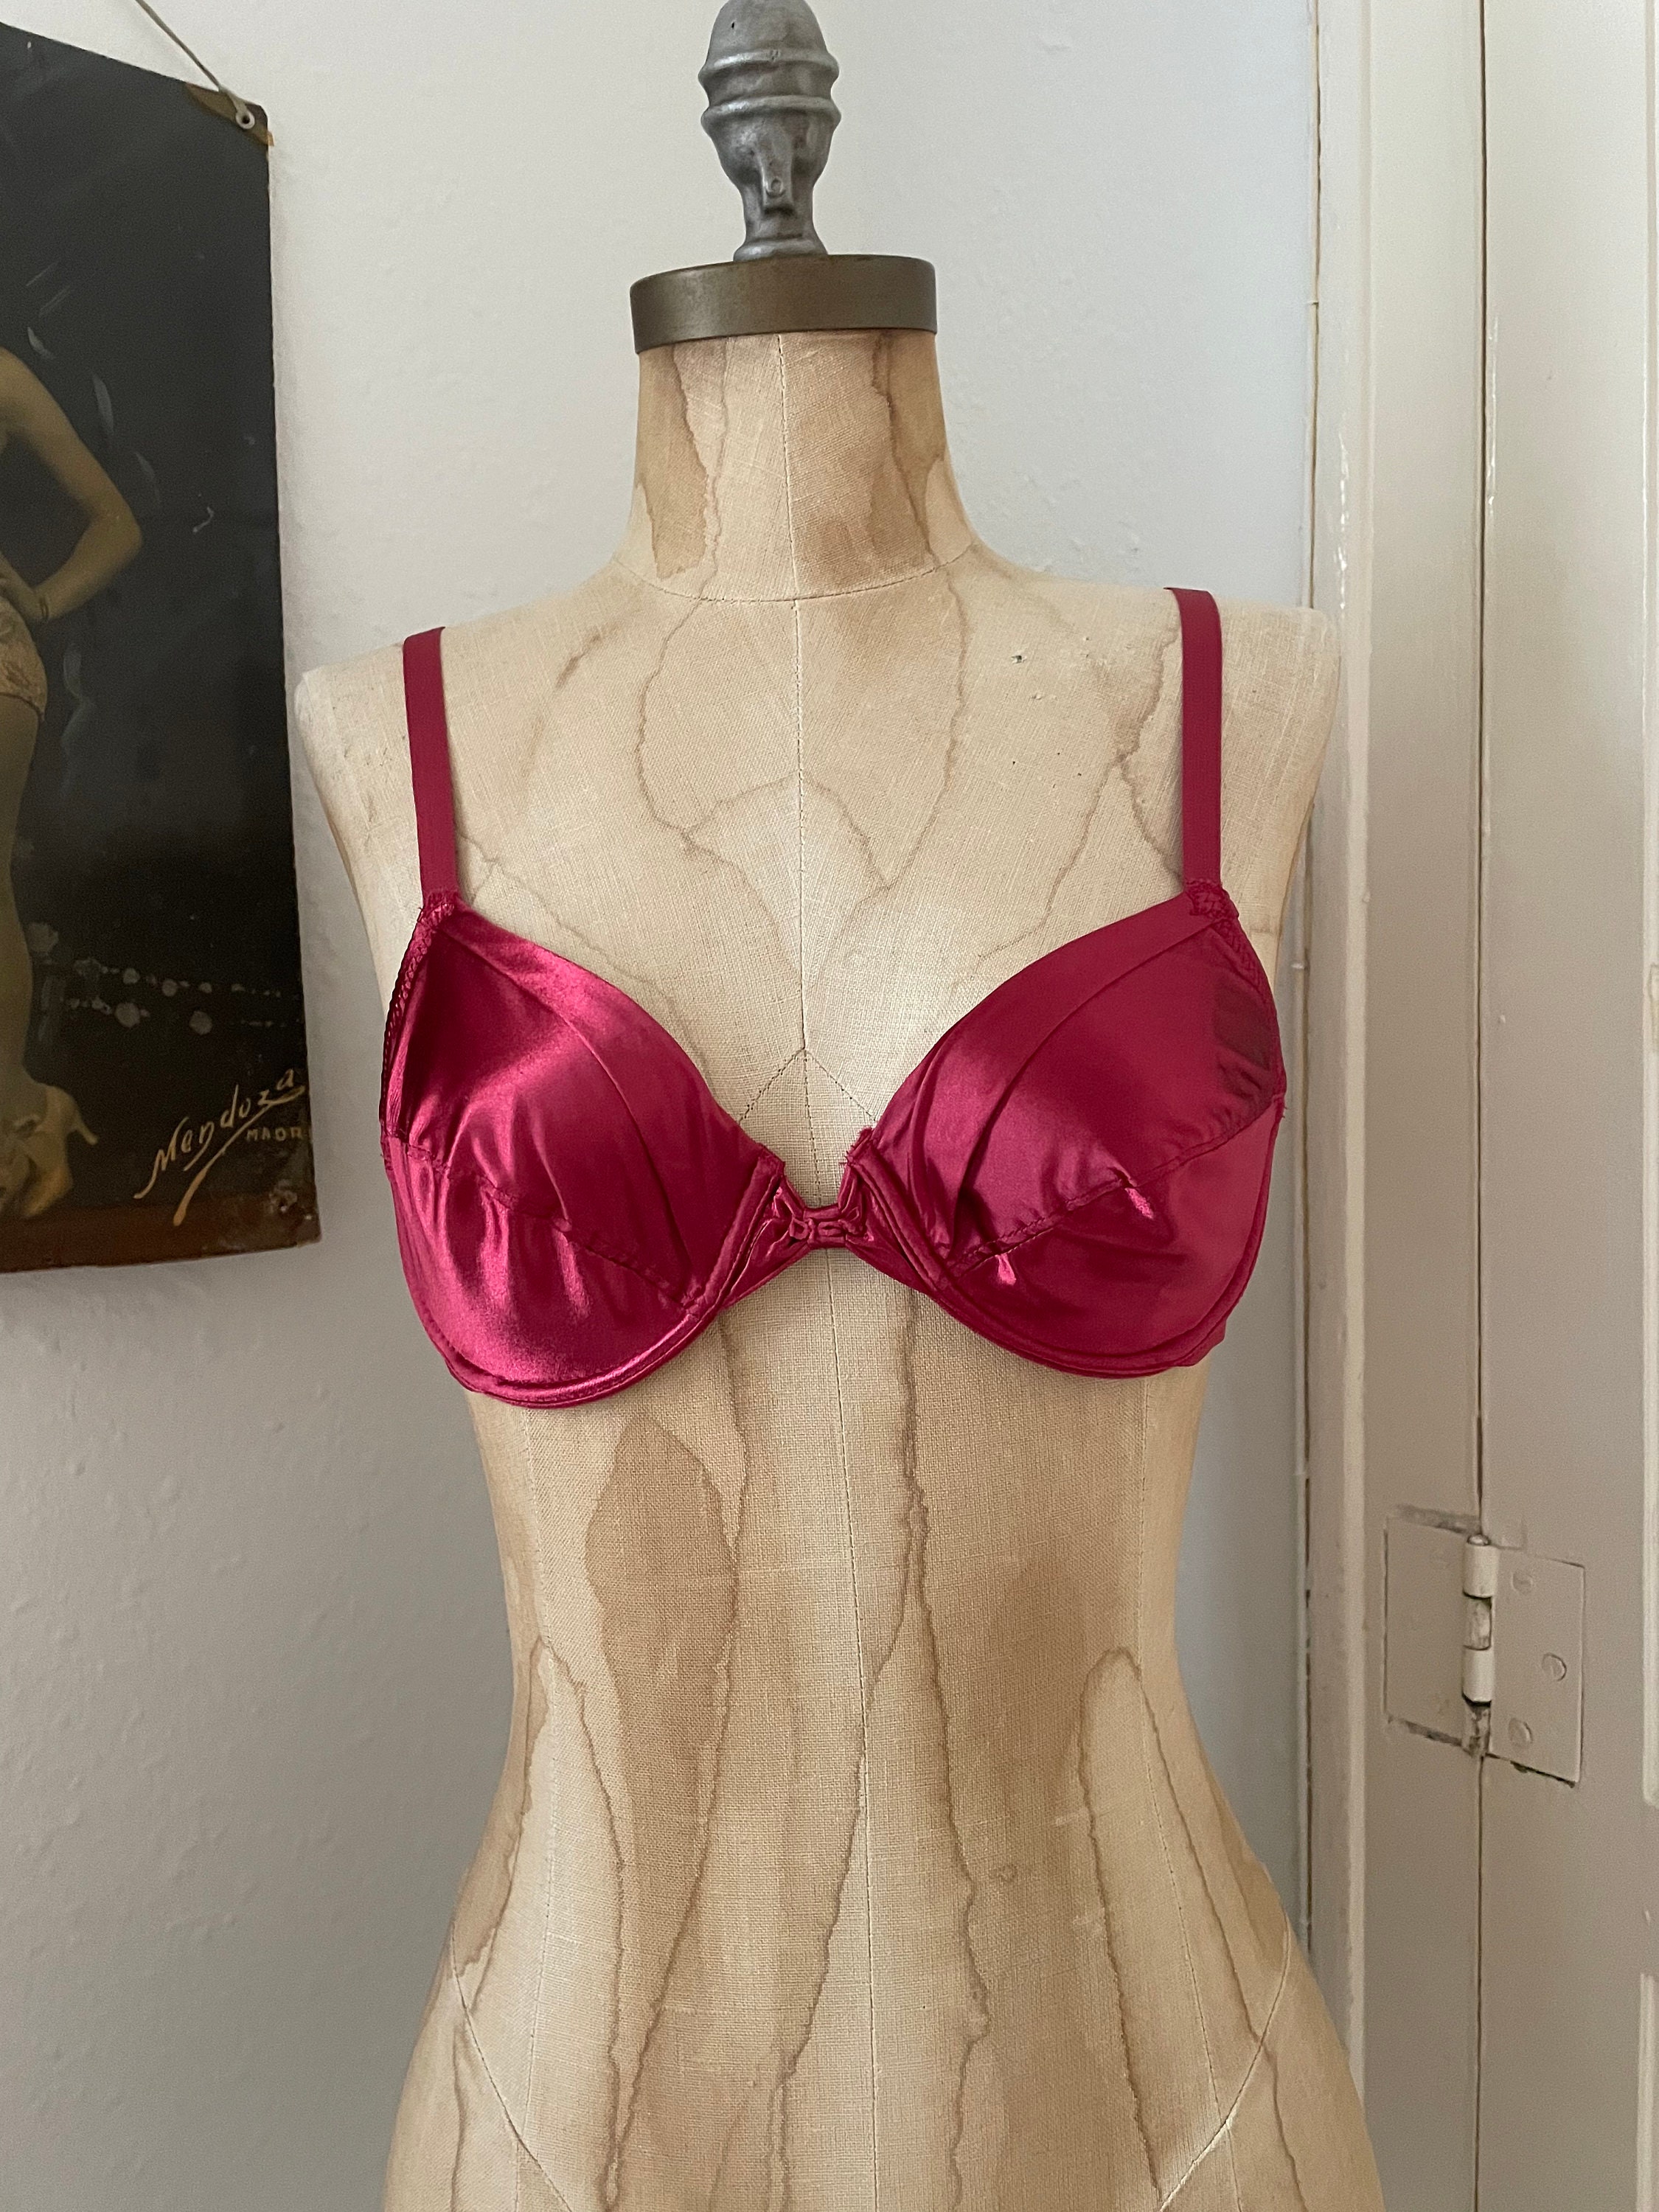 NWT Vintage 90s Fruit of the Loom Pink Floral Satin Bra Style 4416